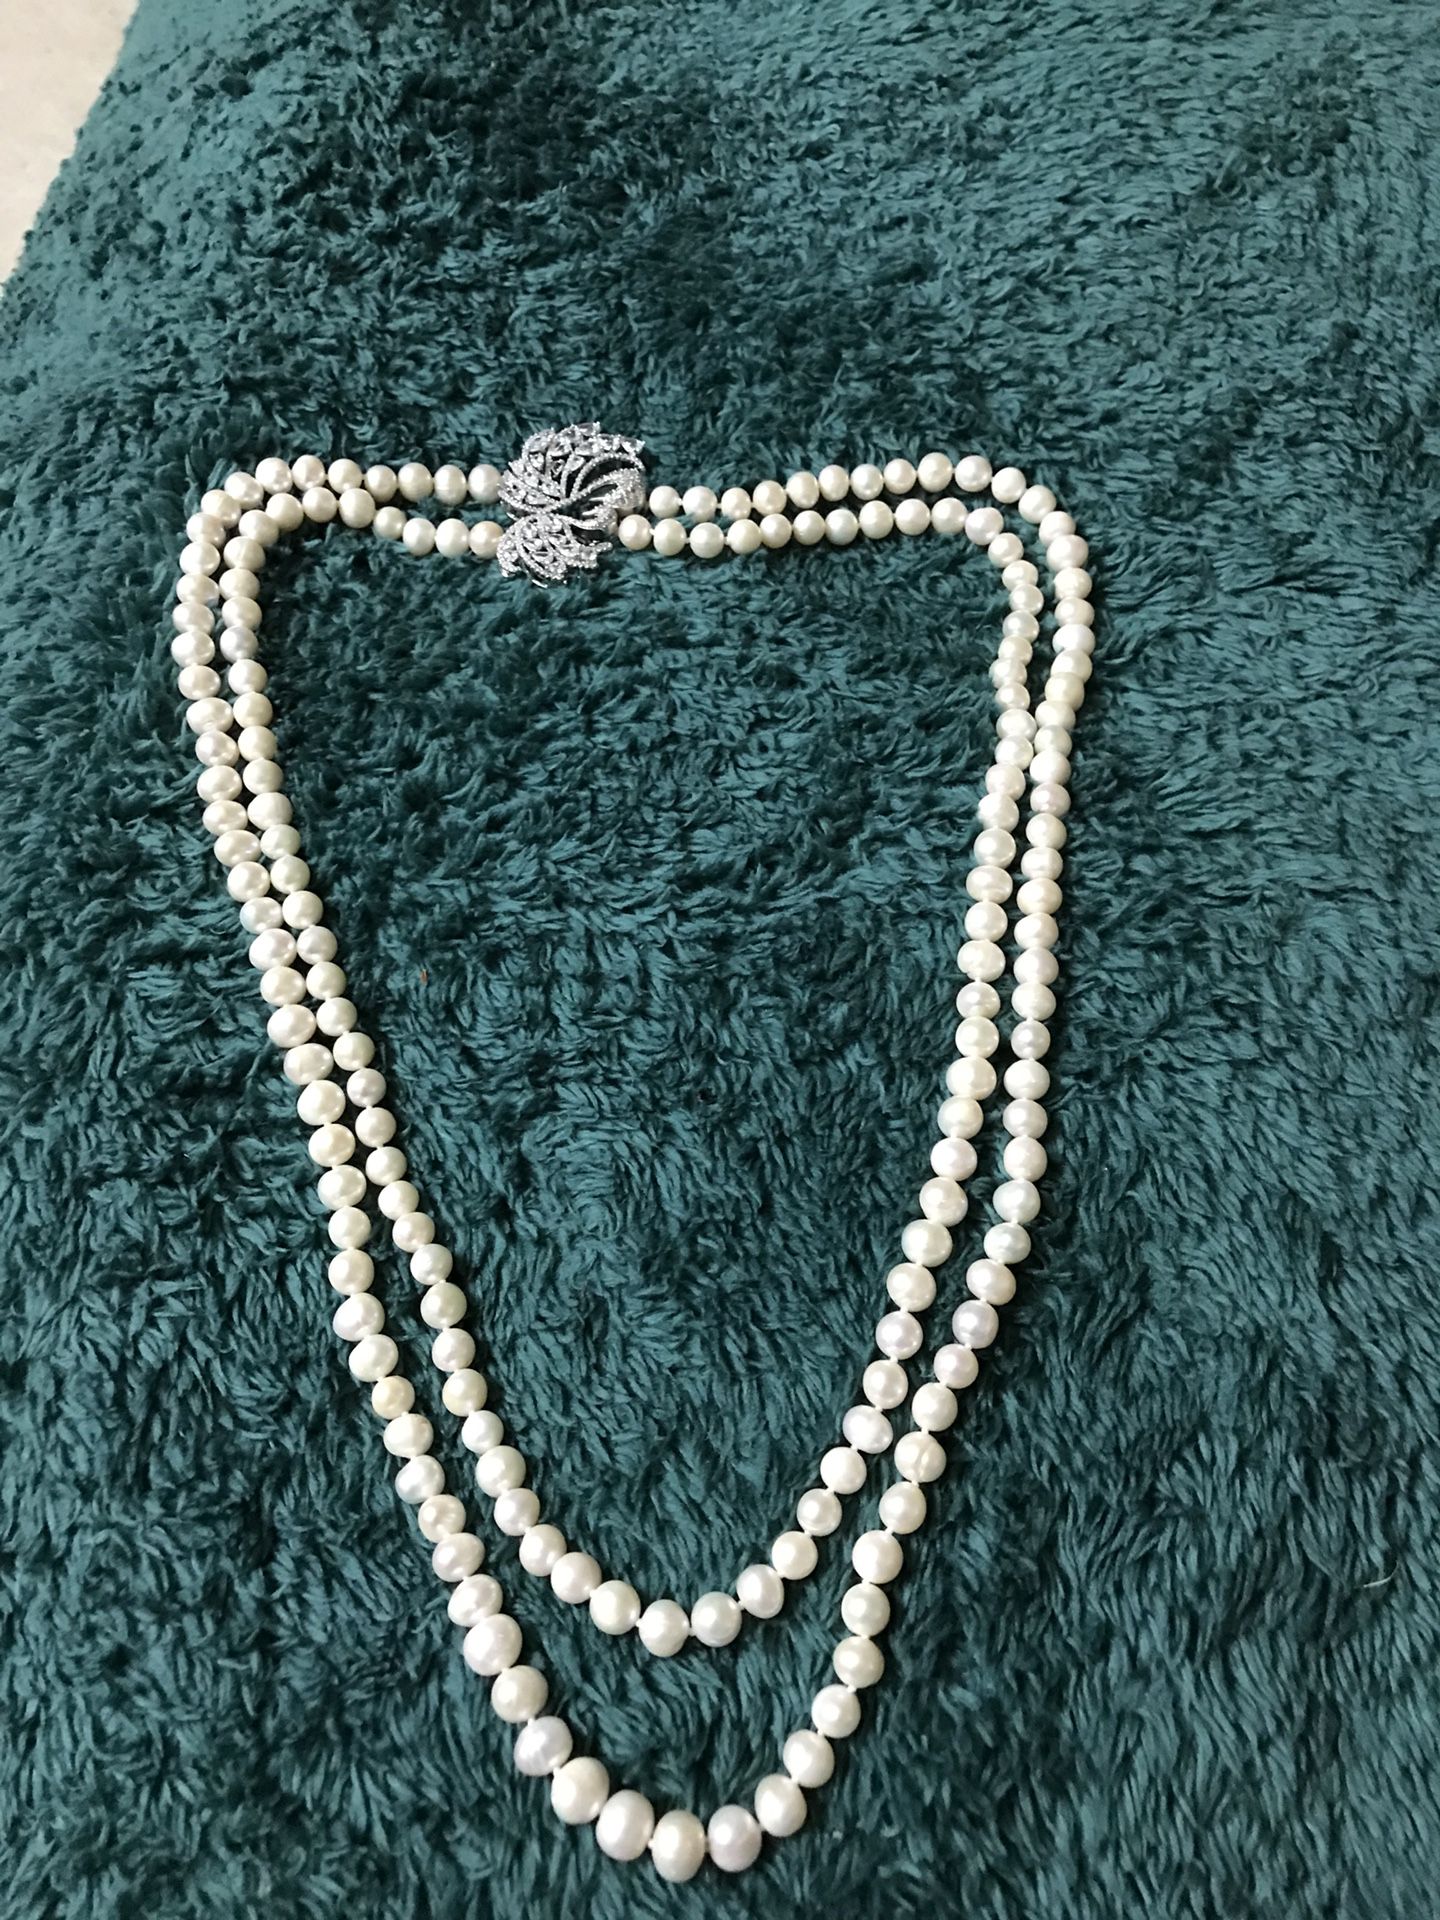 Long 2 layered pearl necklace with side broach